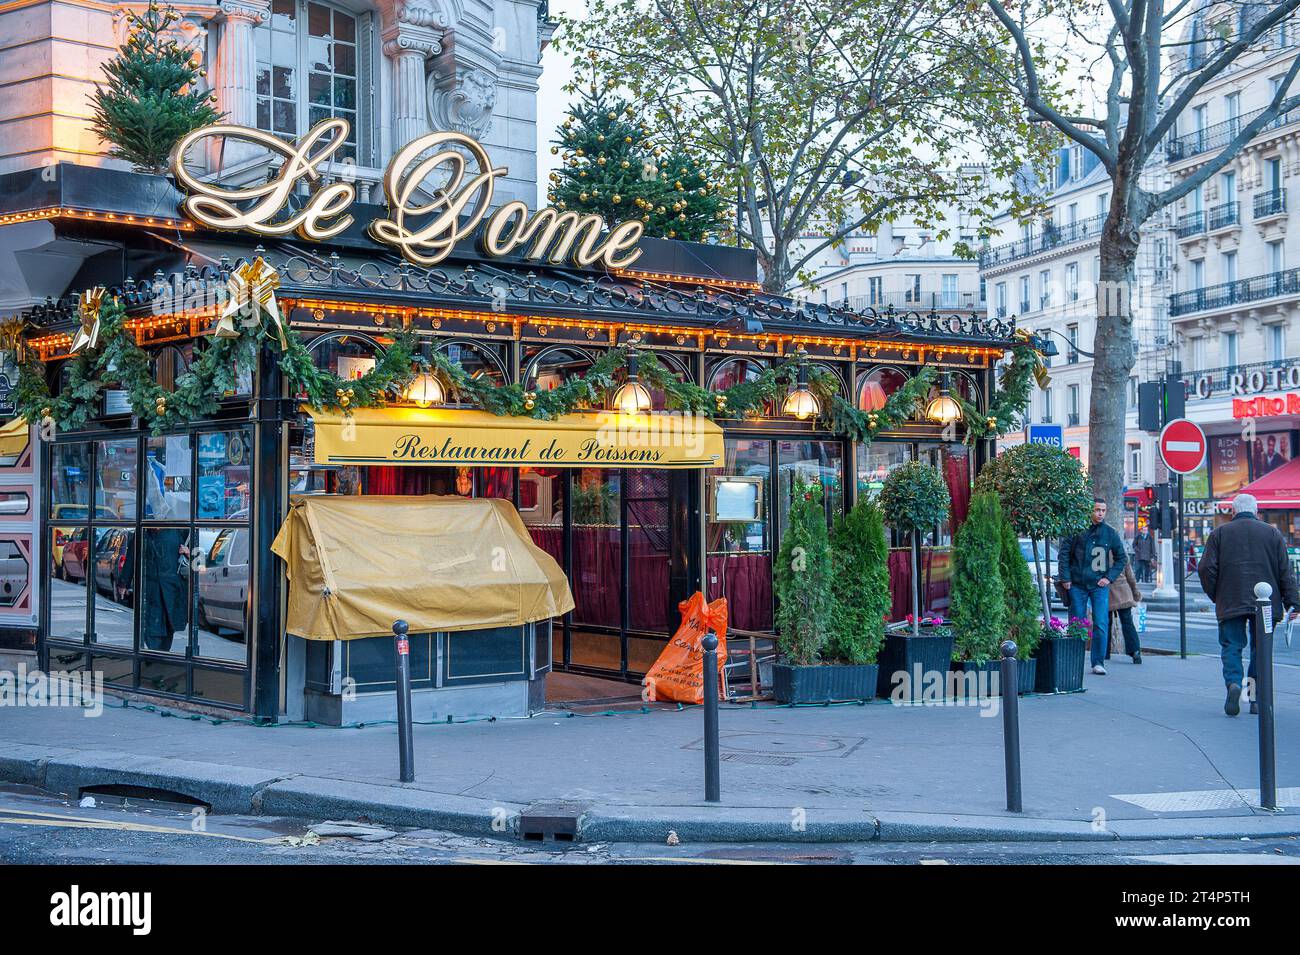 Le Dome Café during late November in Paris. It is a legendary brasserie and restaurant in Montparnasse established 1898 Stock Photo